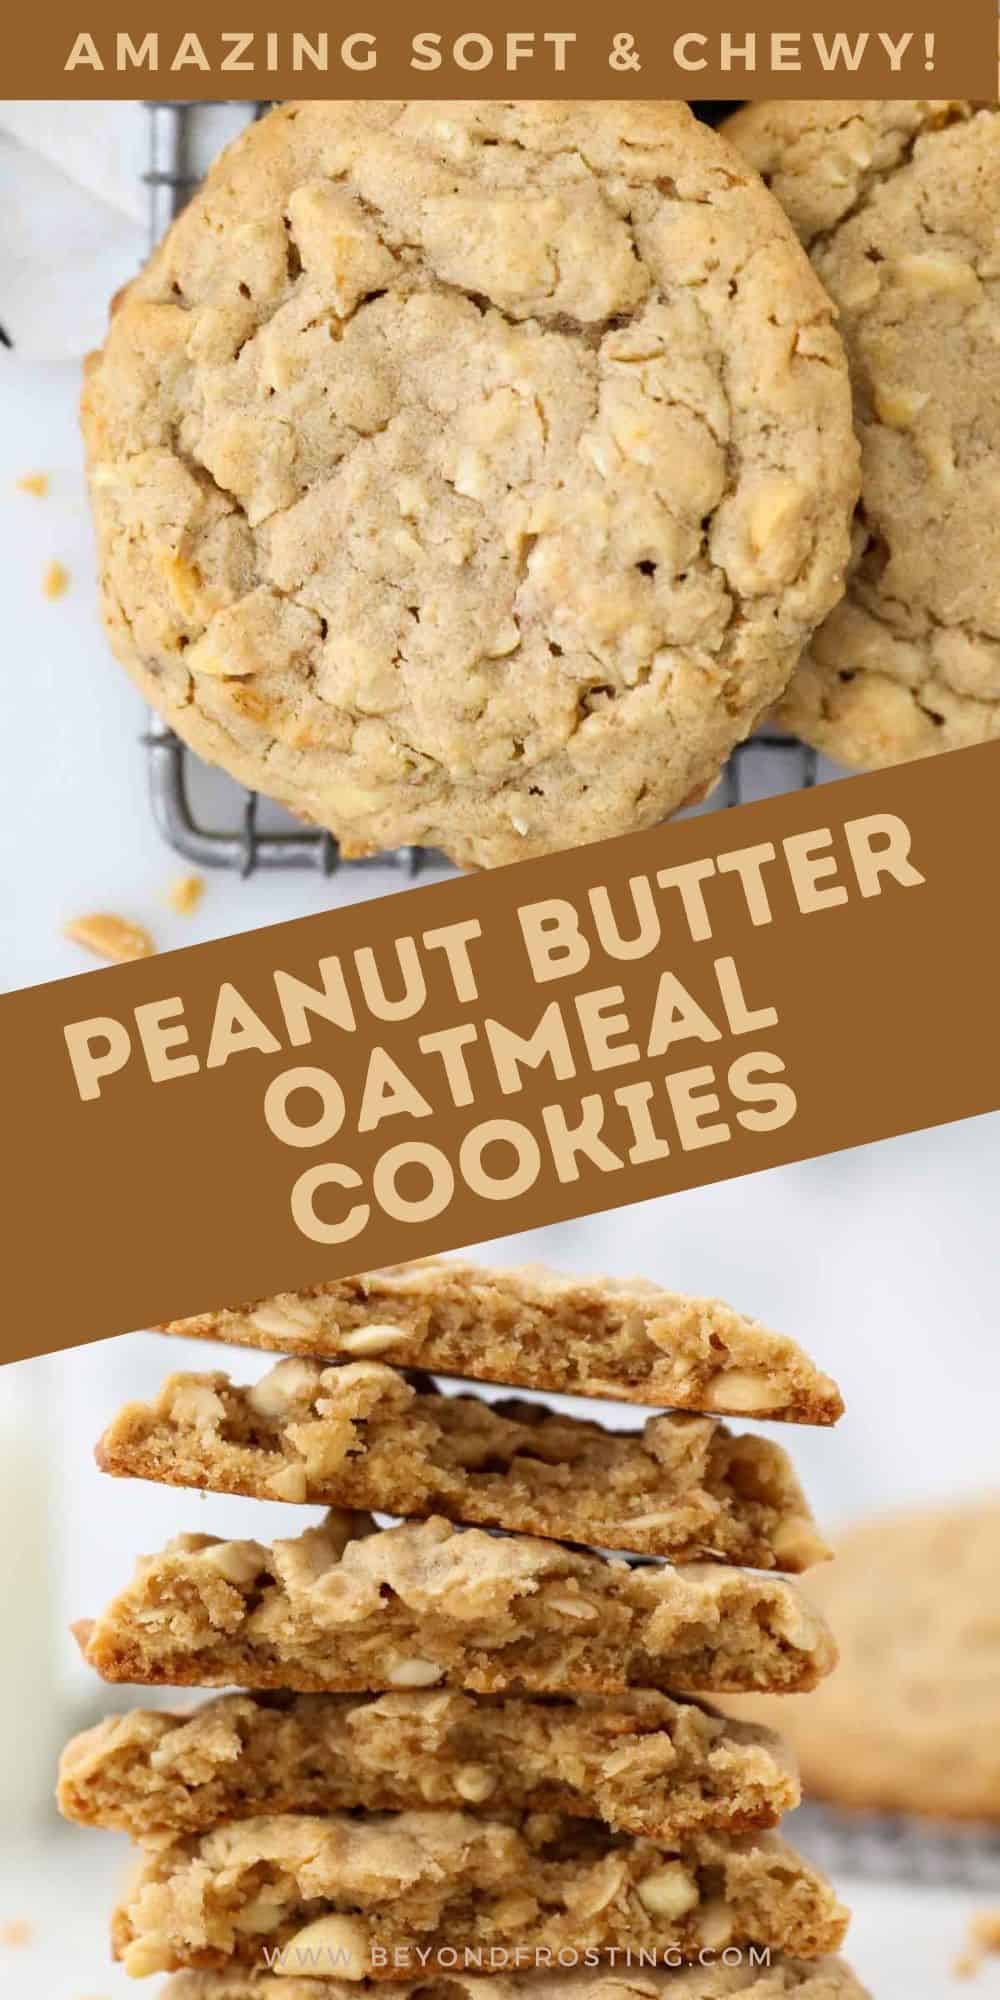 Easy Peanut Butter Oatmeal Cookies l Beyond Frosting